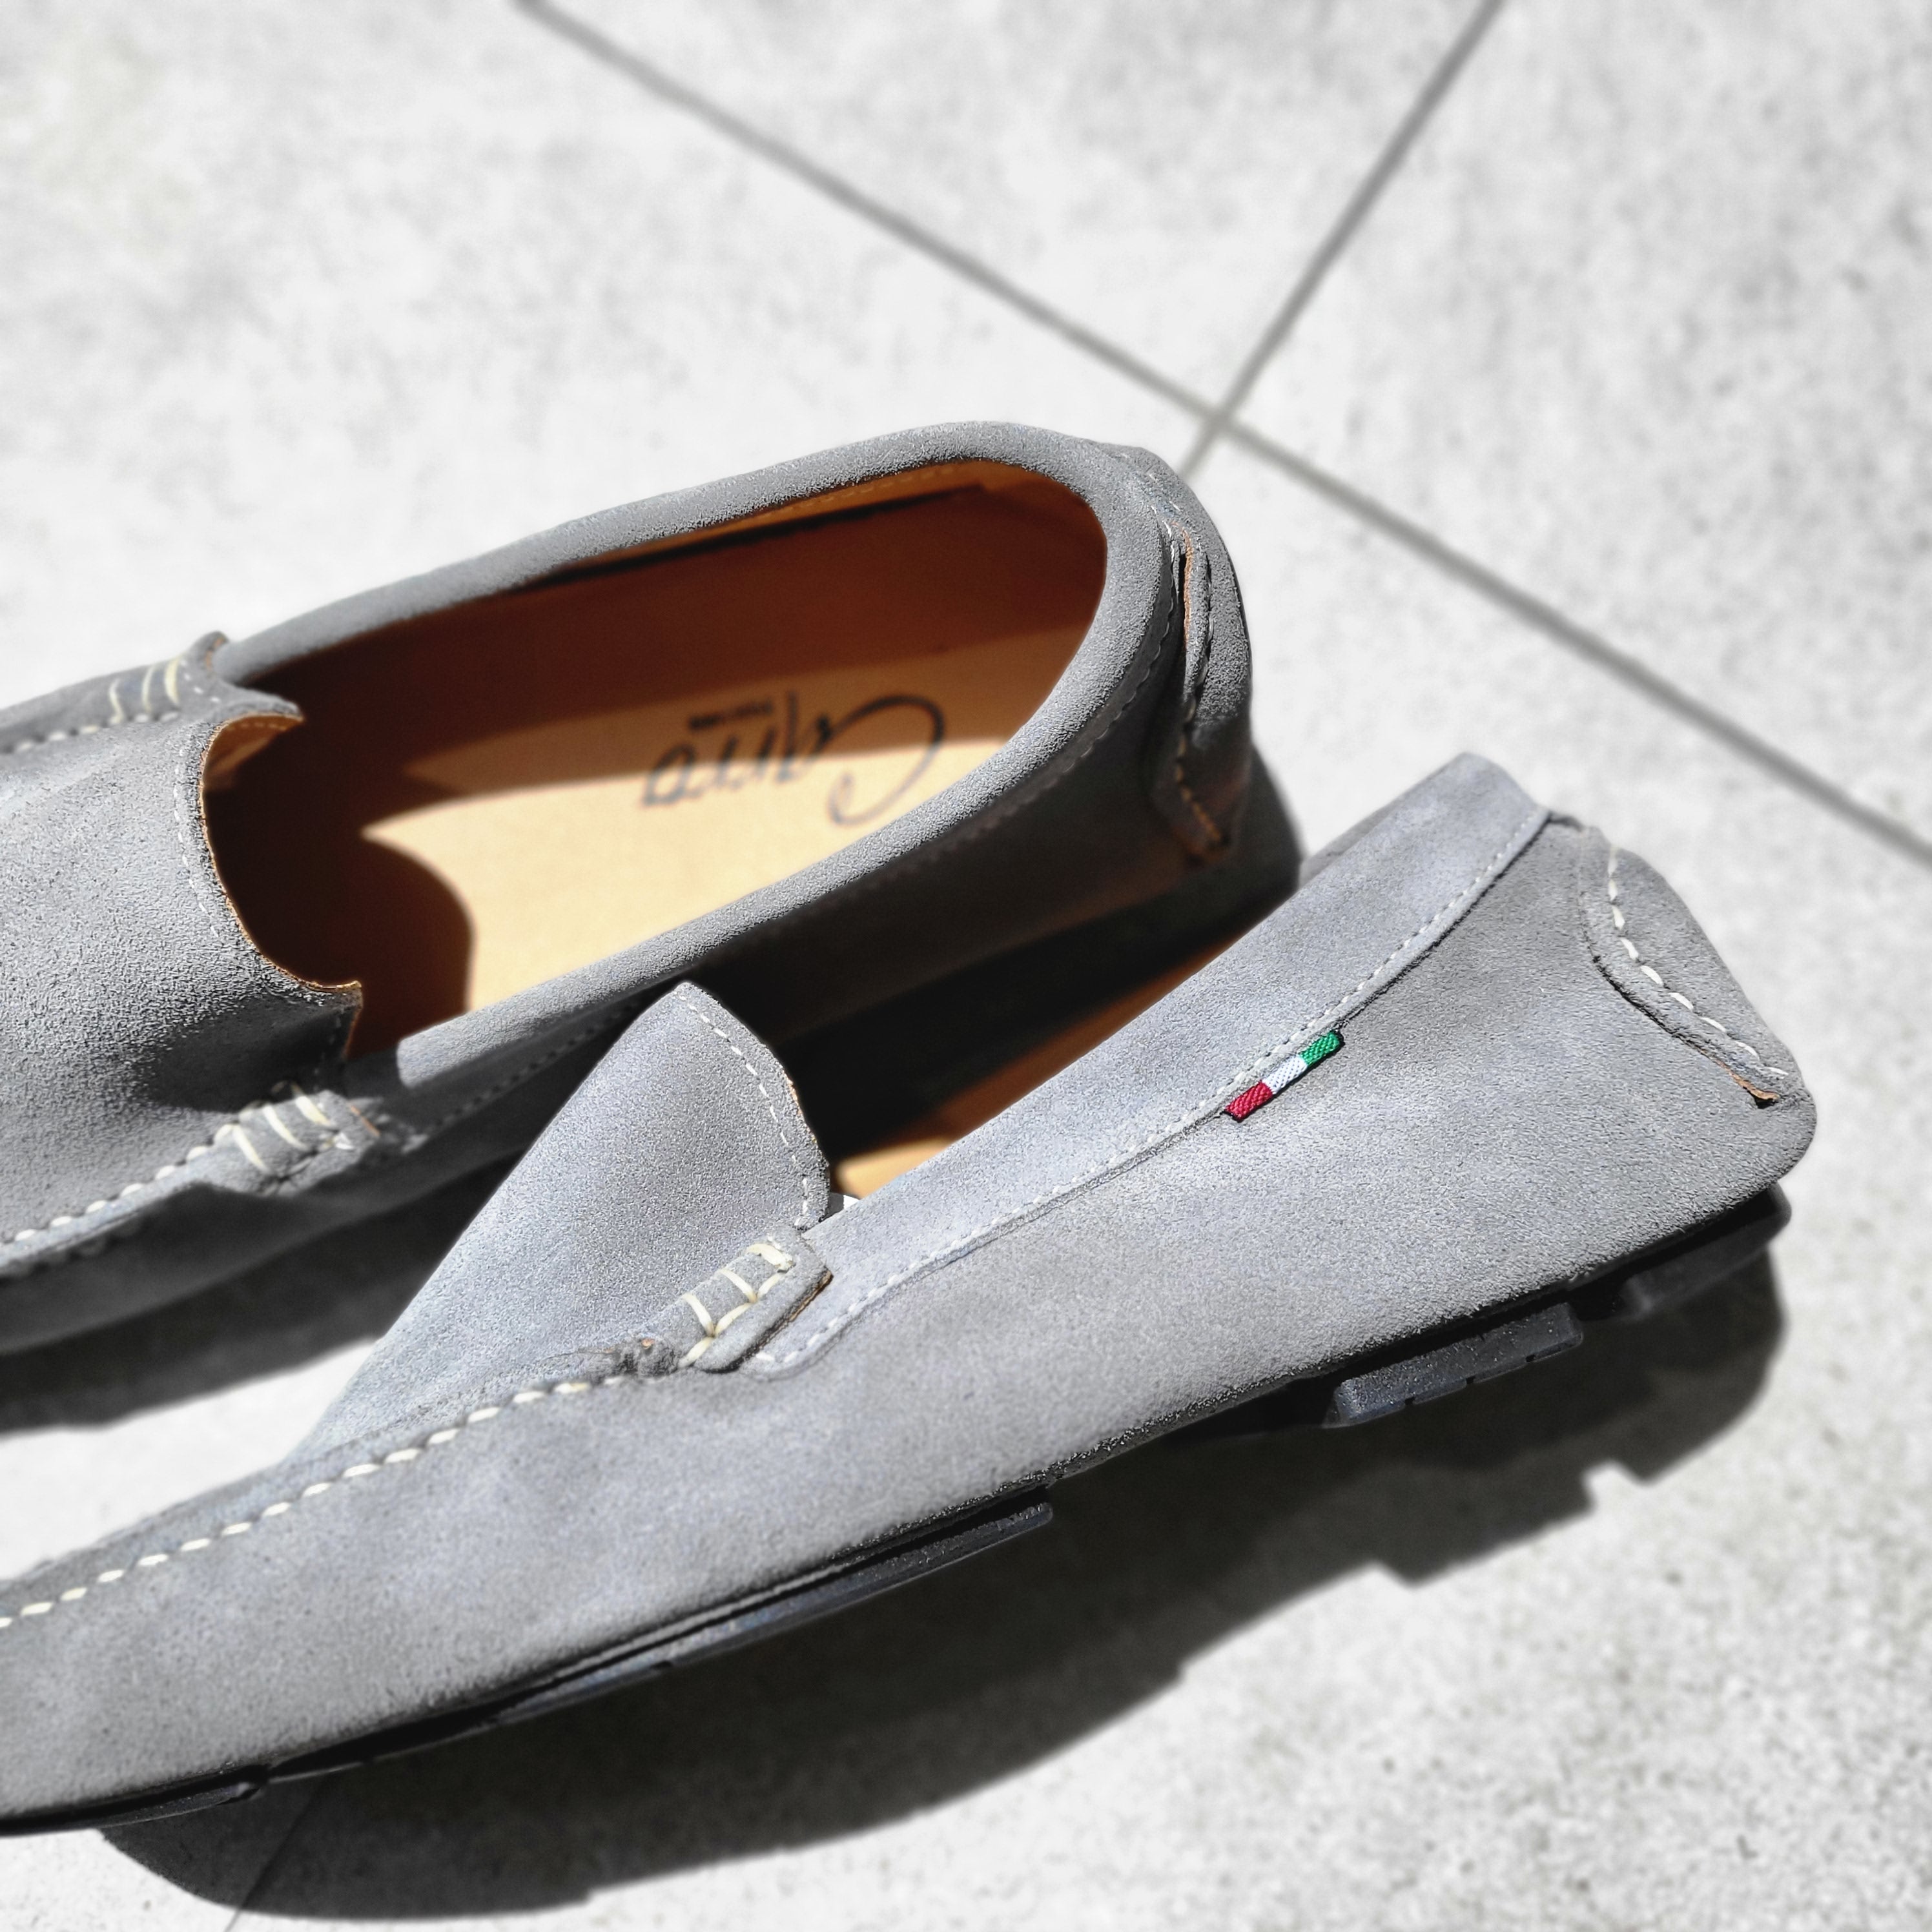 Carro Positano Italy suede leather two-tone men loafers dress